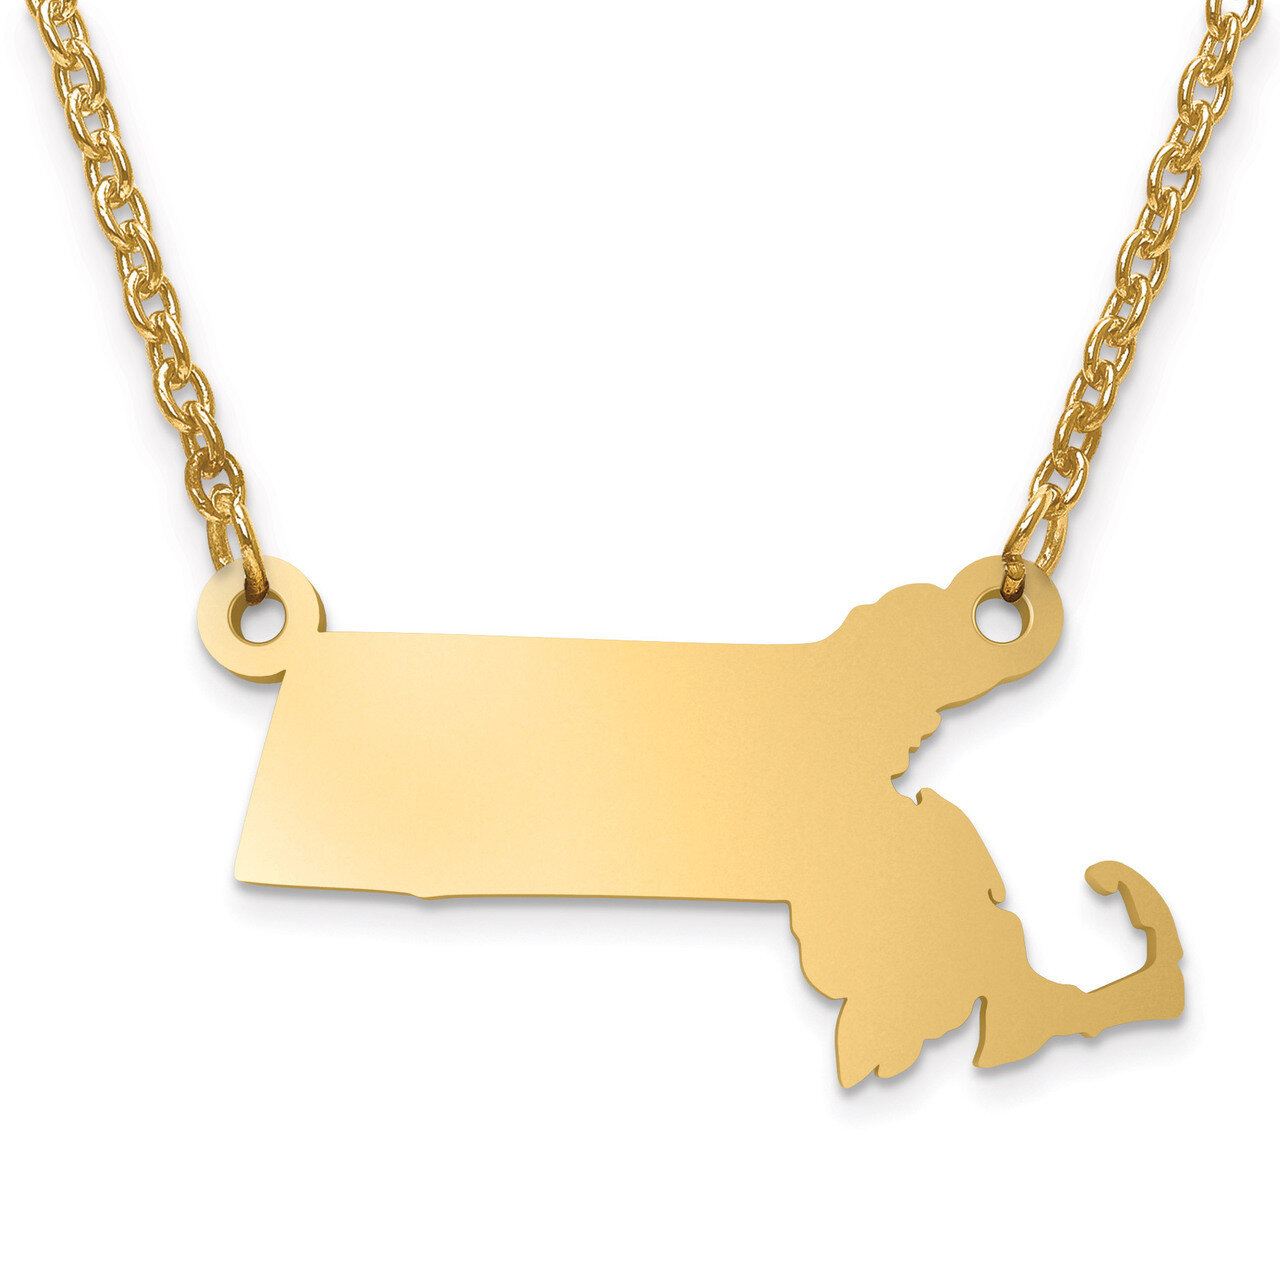 Massachusetts State Pendant with Chain Engravable Gold-plated on Sterling Silver